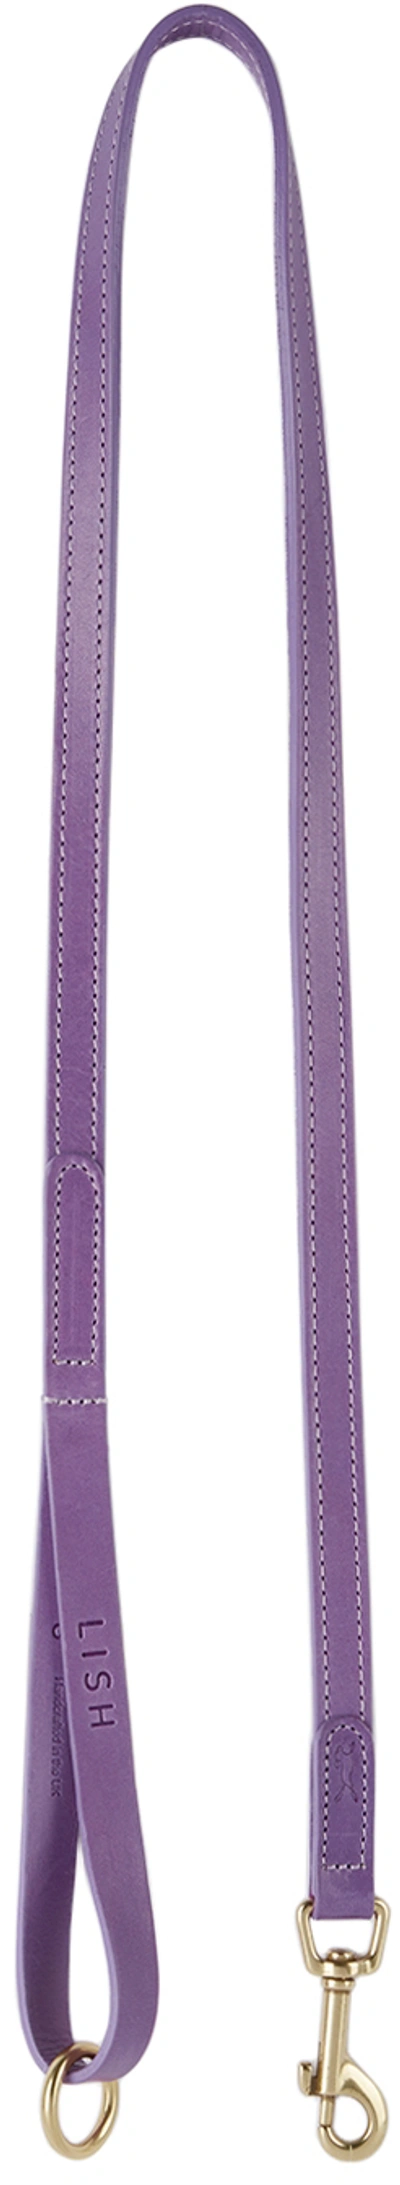 Lish Purple Small Coopers Leash In Violet